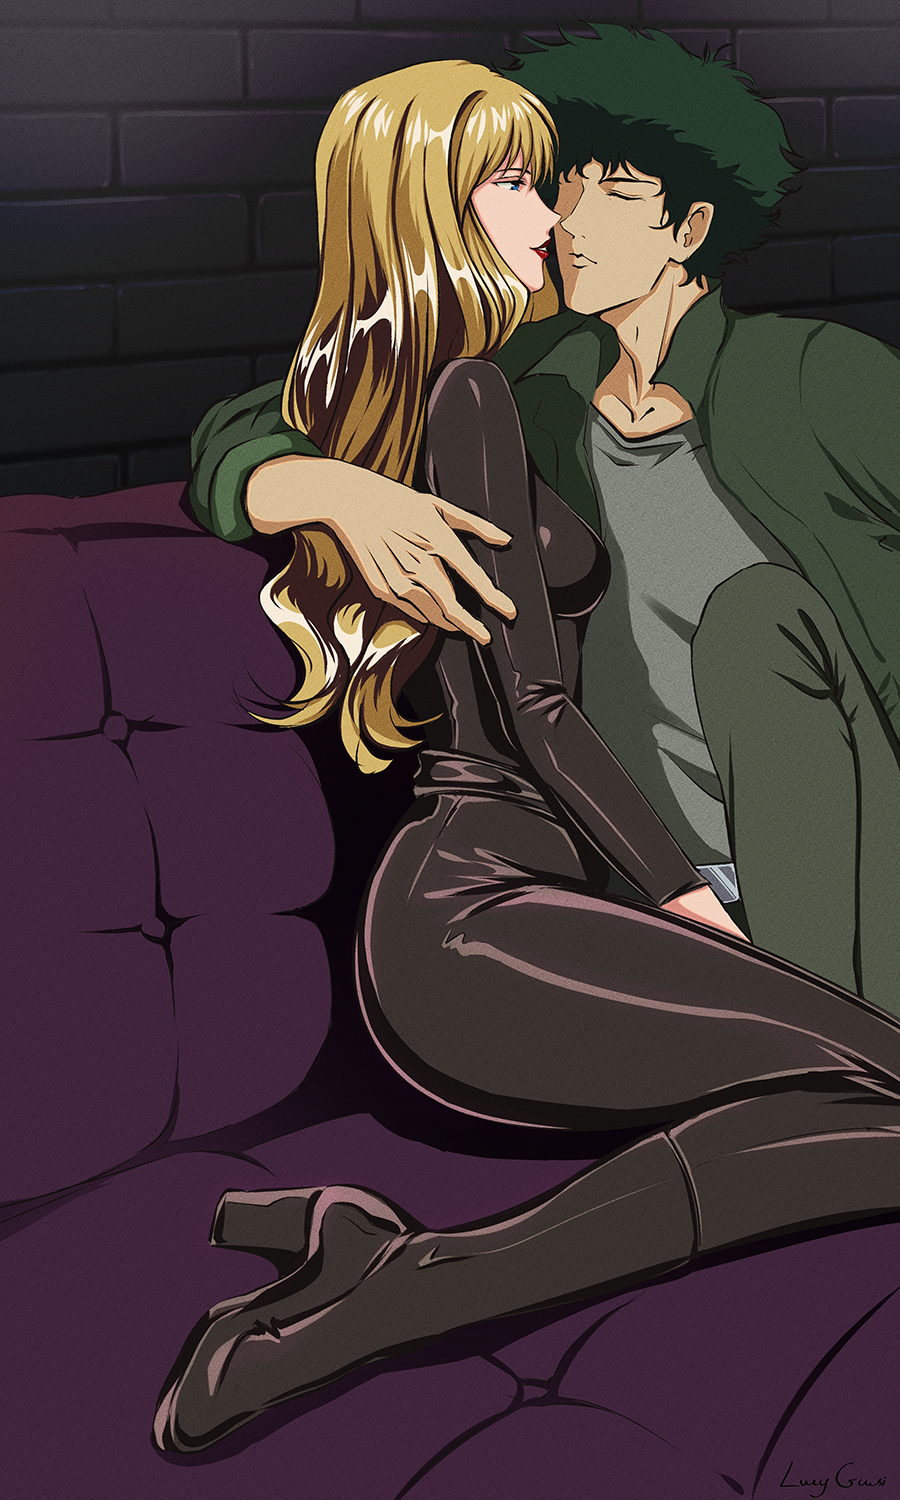 blonde_hair blue_eyes boots catsuit couple cowboy cowboy_bebop curly_hair green_hair highres julia_(cowboy_bebop) leather lucyguusi spike_spiegel spikes